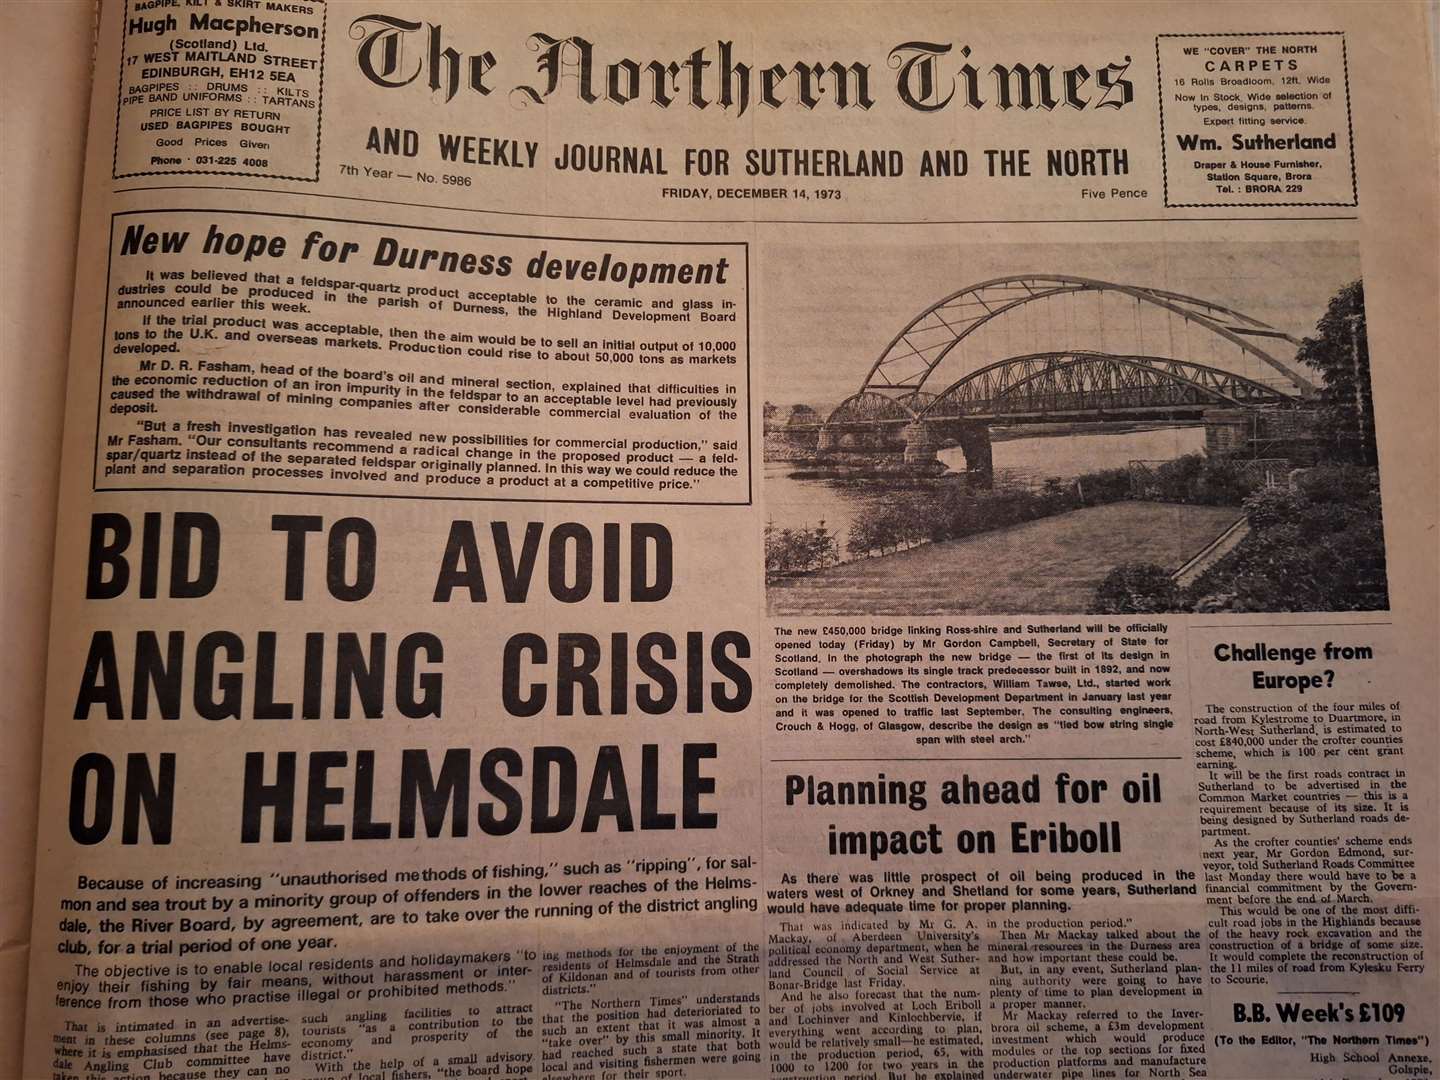 The edition of December 14, 1973.